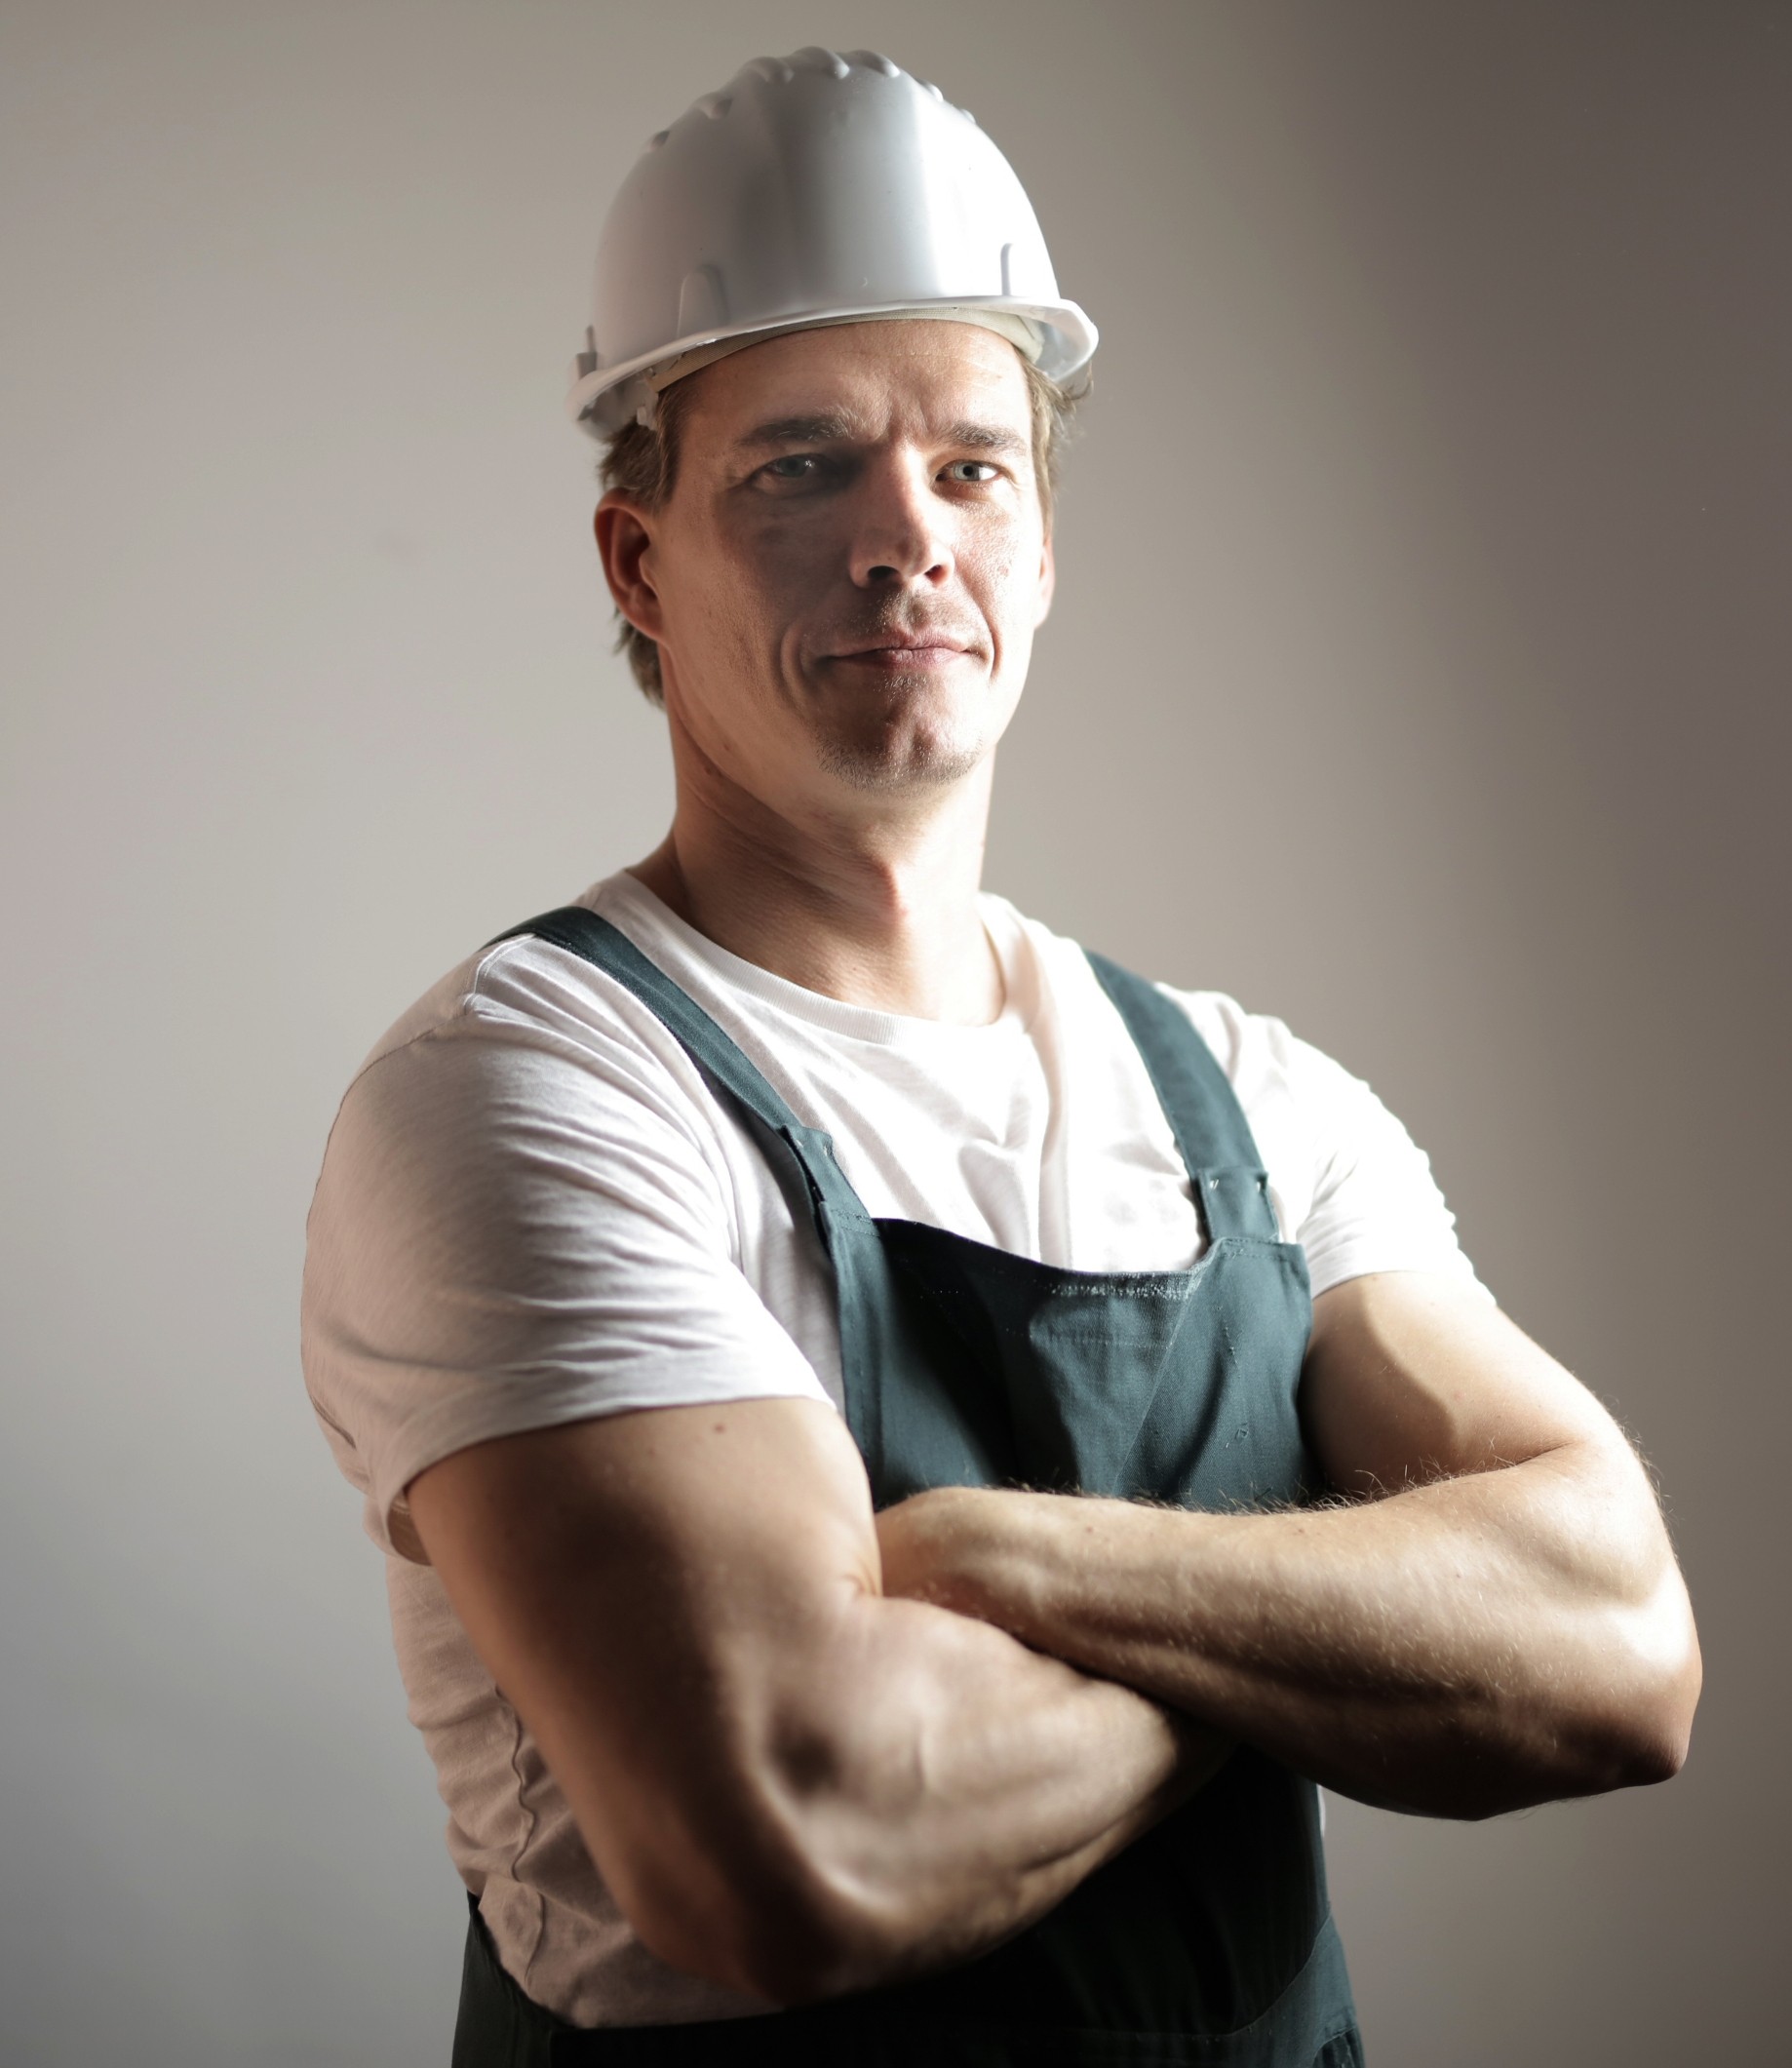 Builder with hard hat